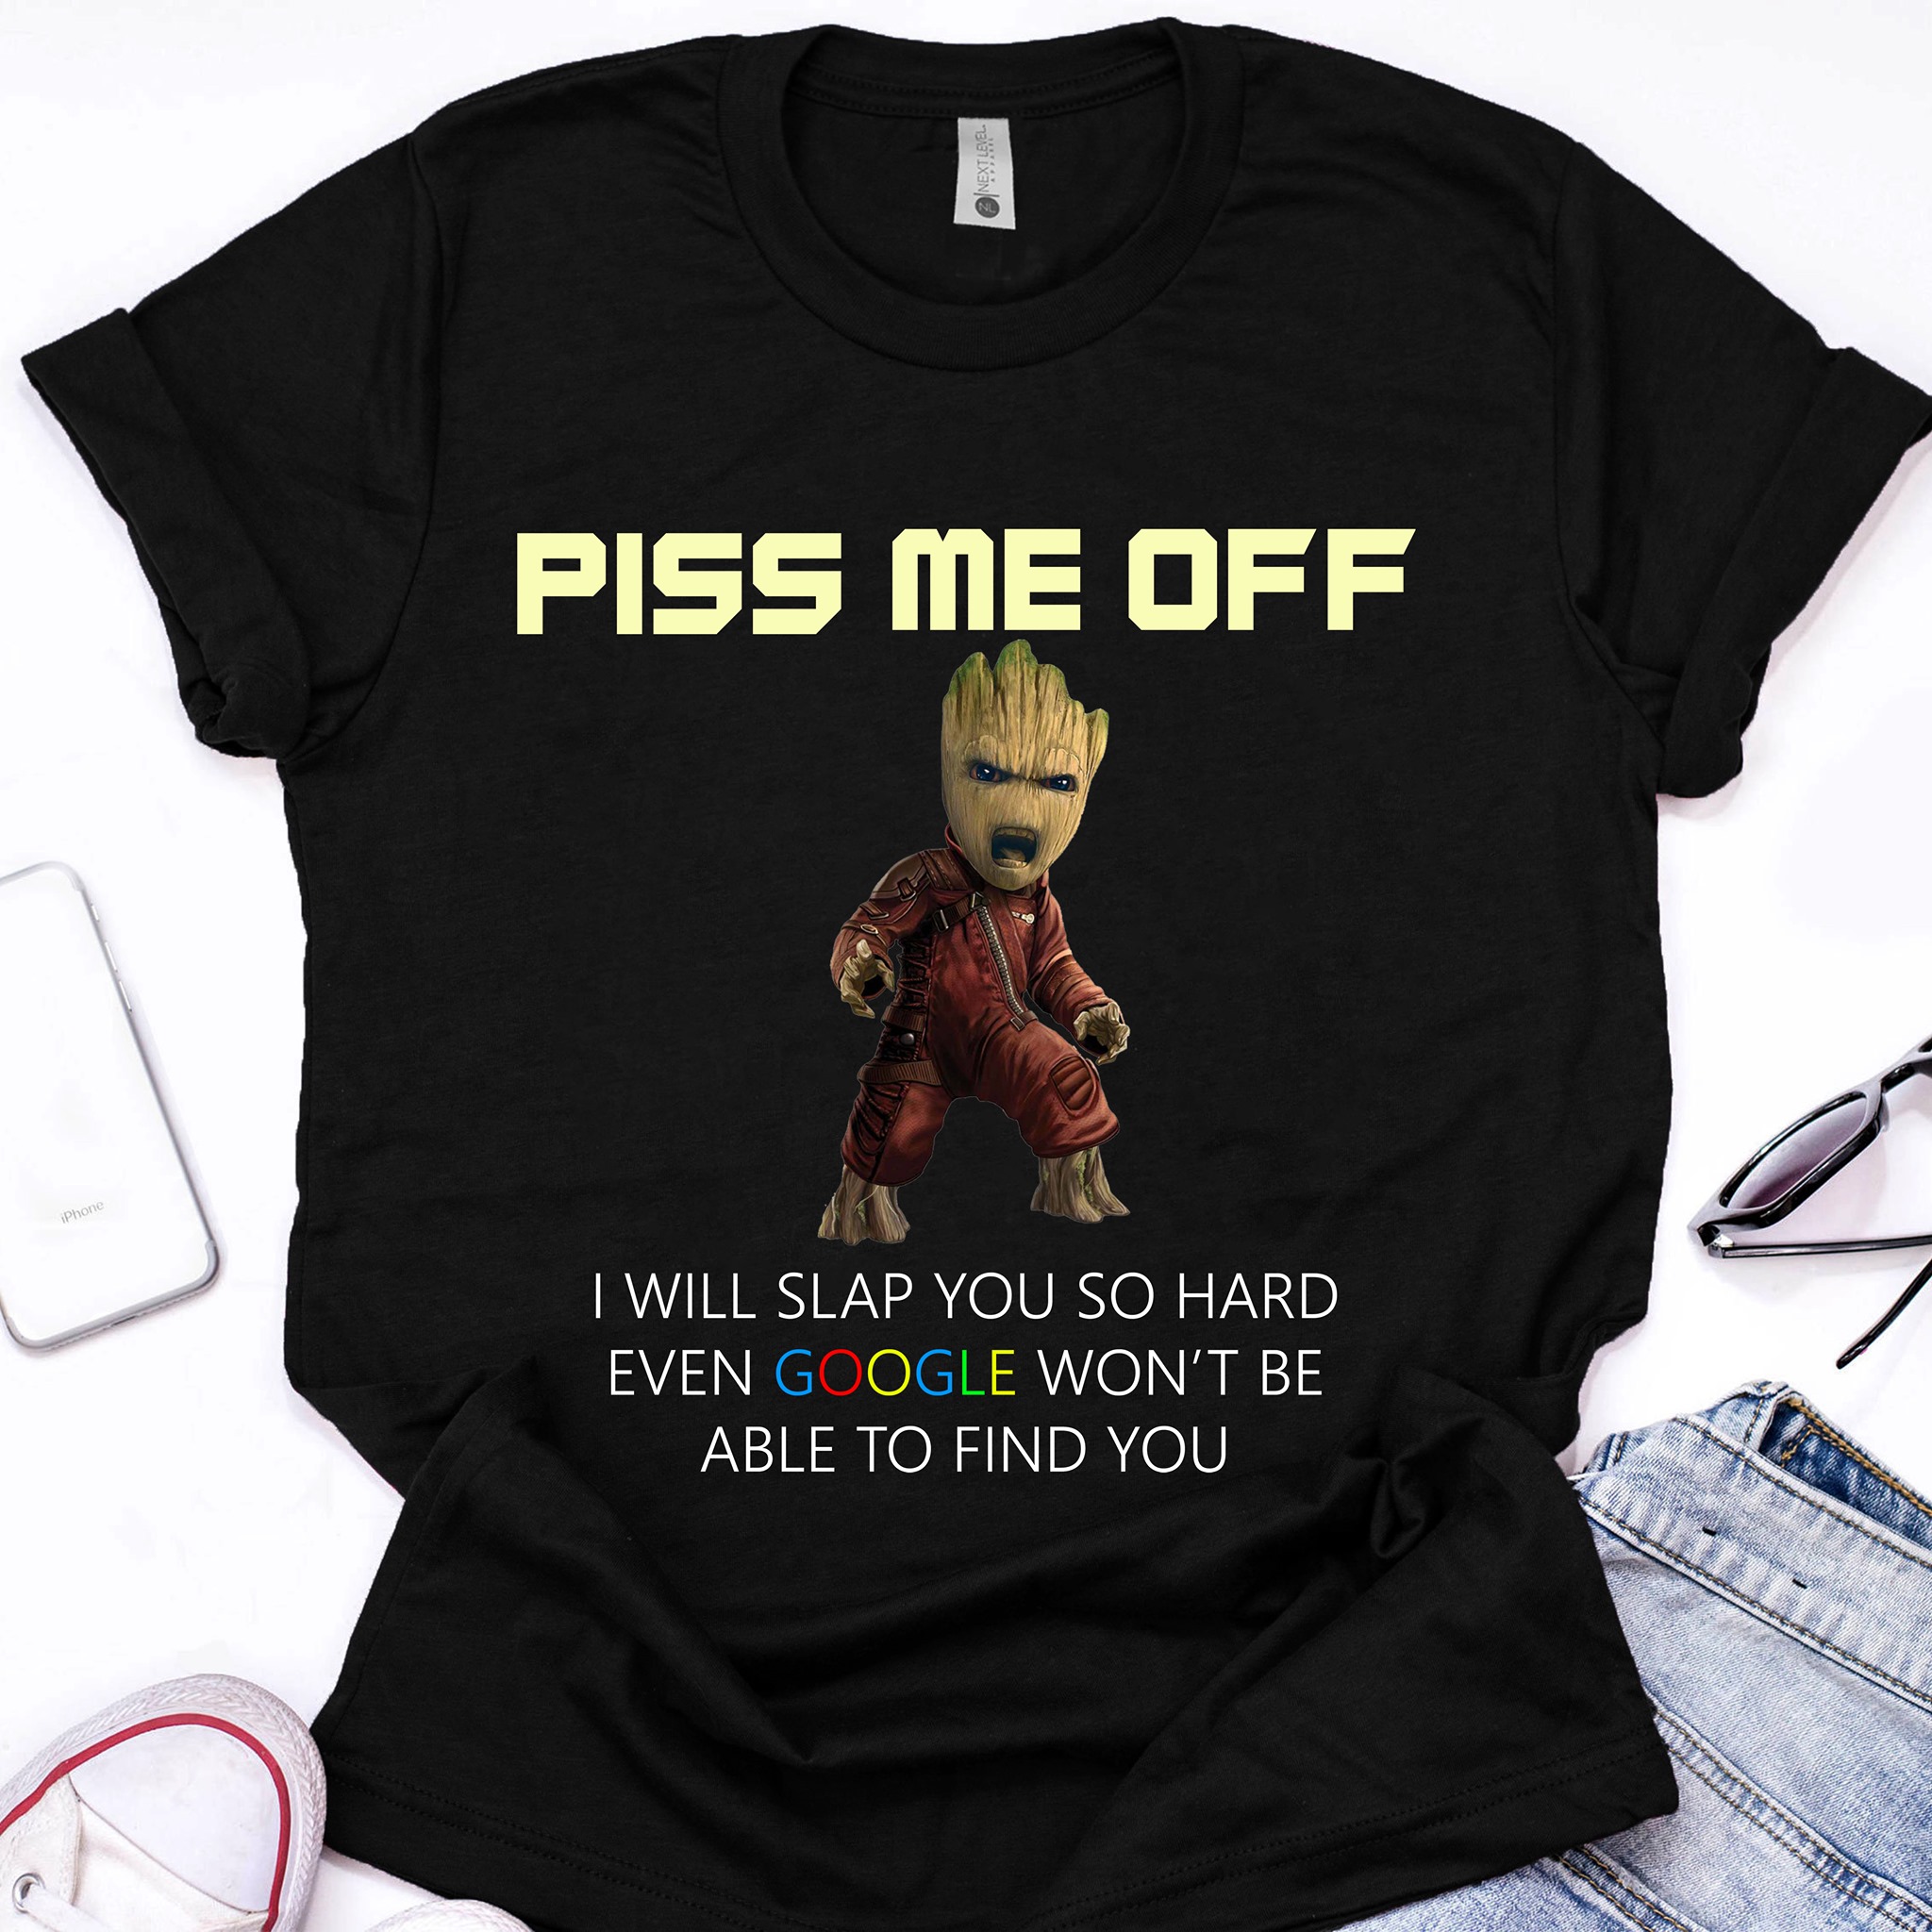 Piss me off I will slap you so hard - Baby groot